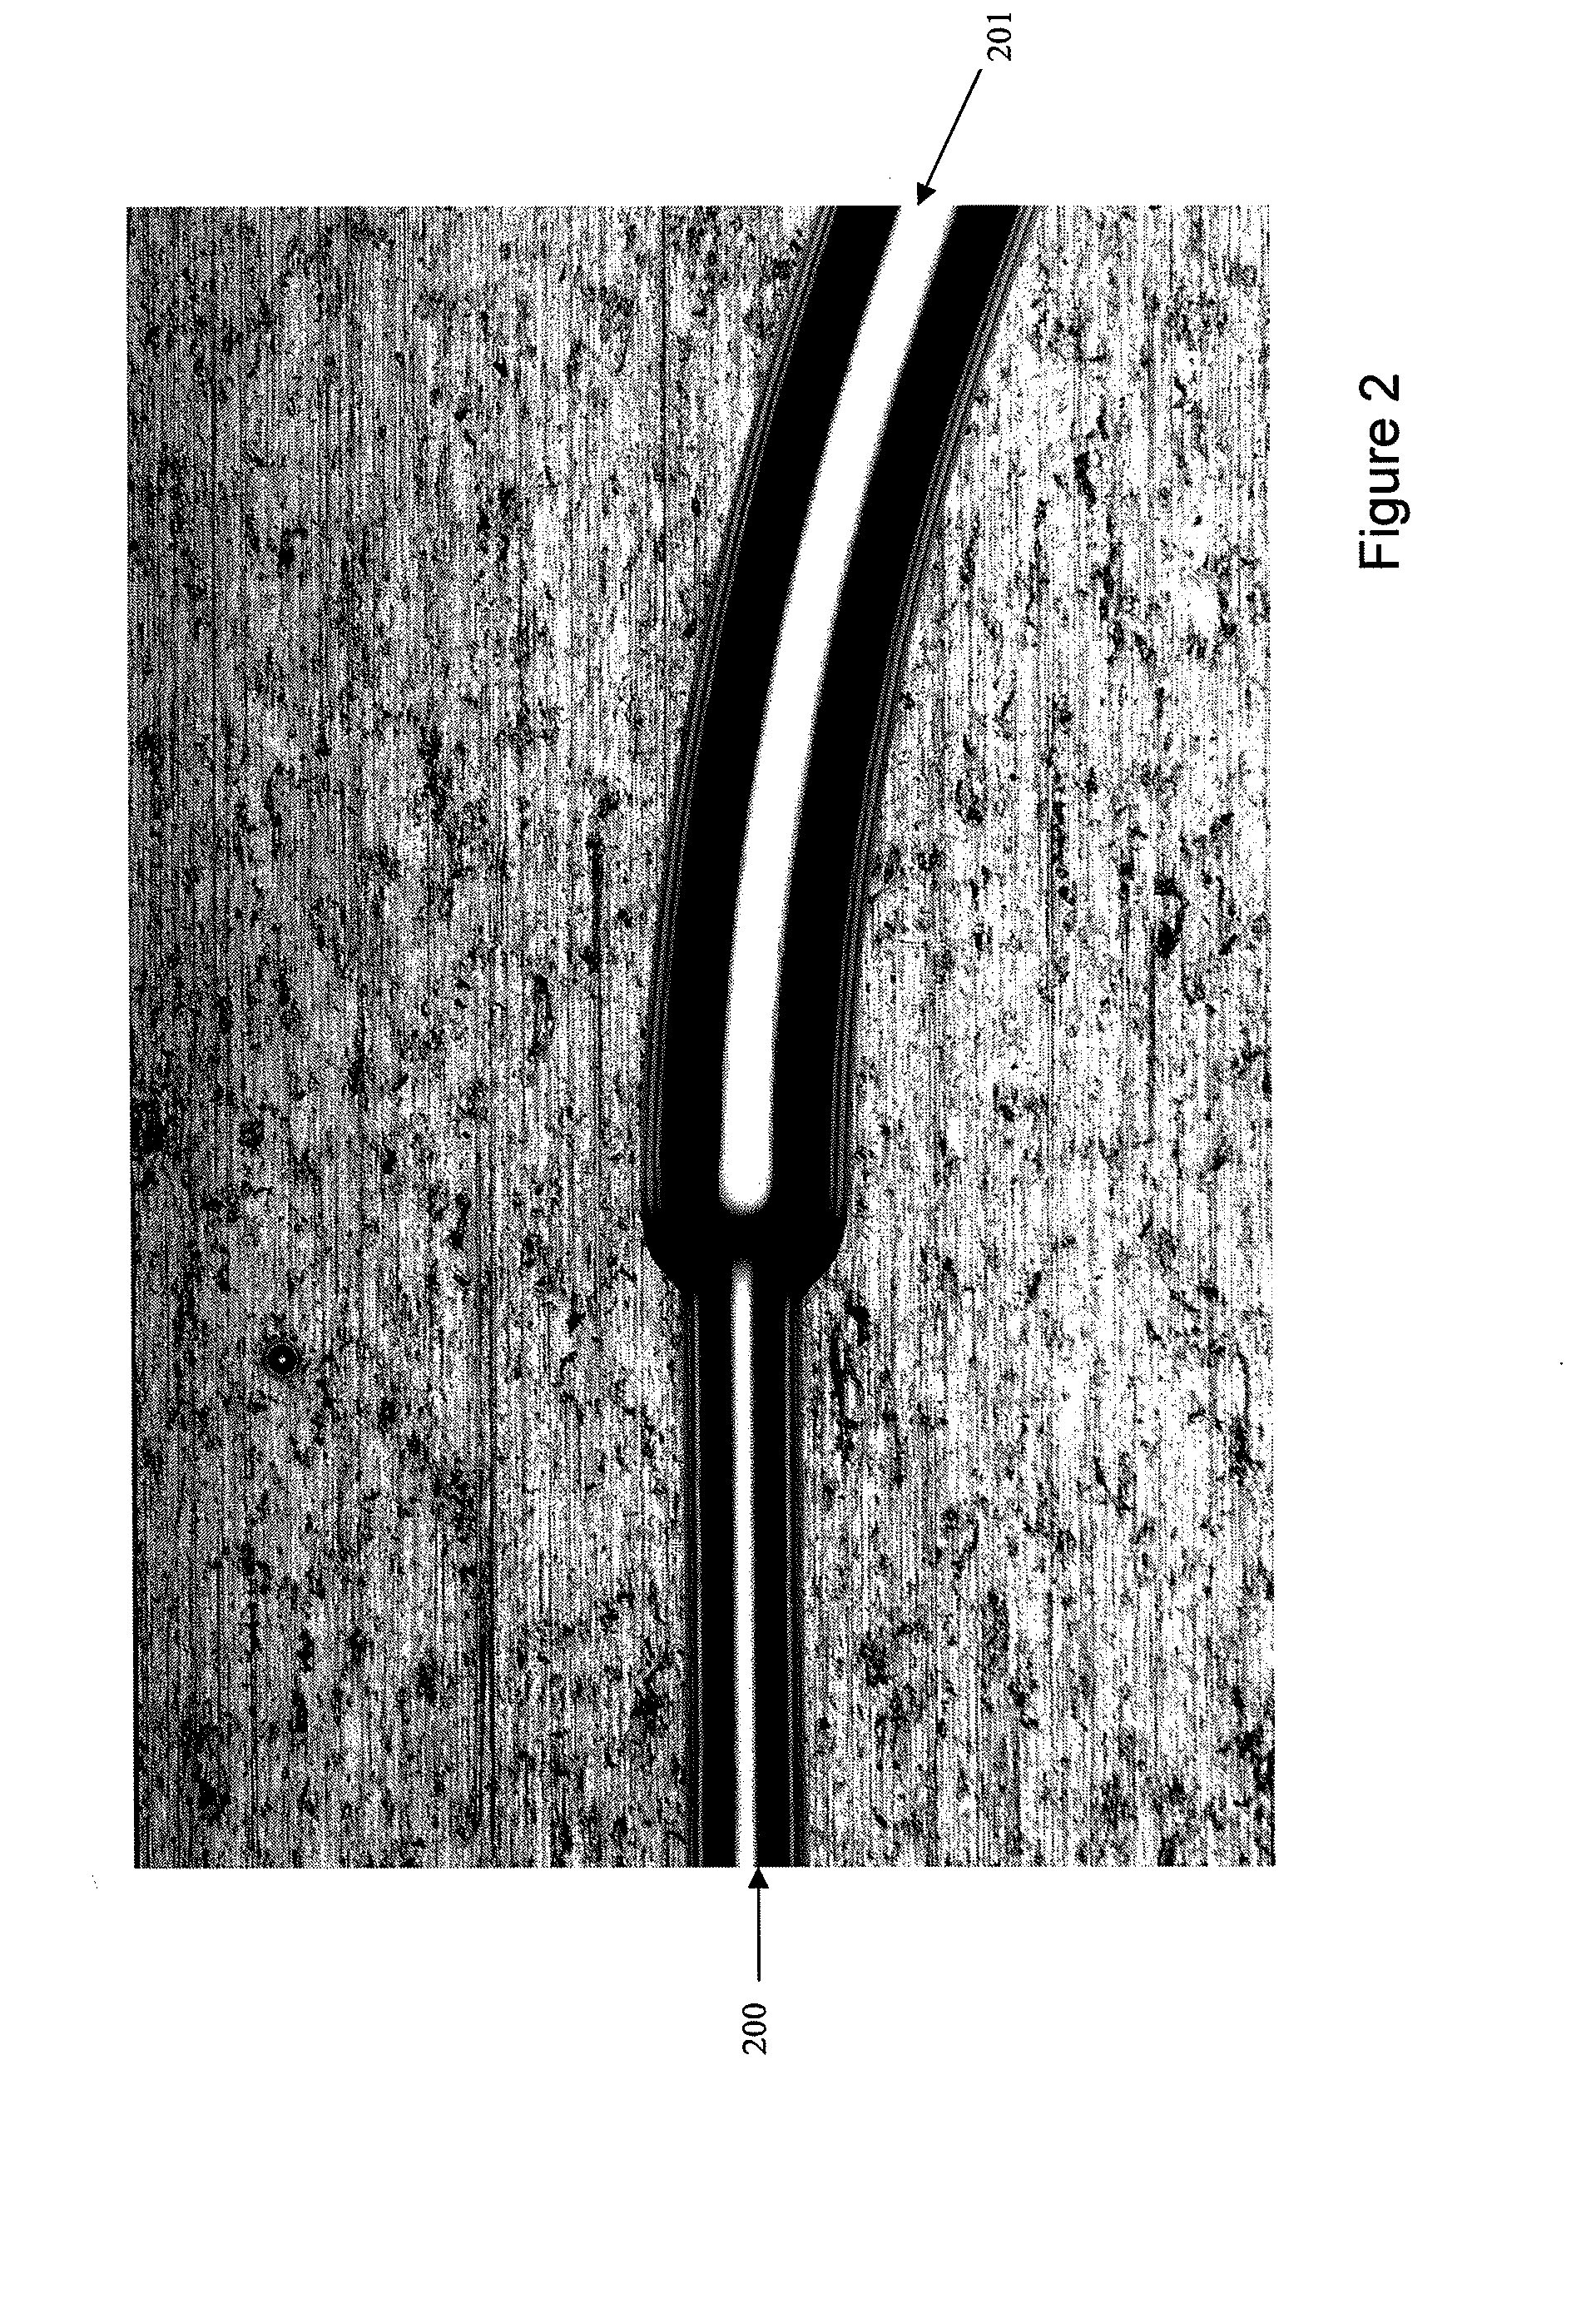 Chromatography apparatus having diffusion-bonded and surface-modified components